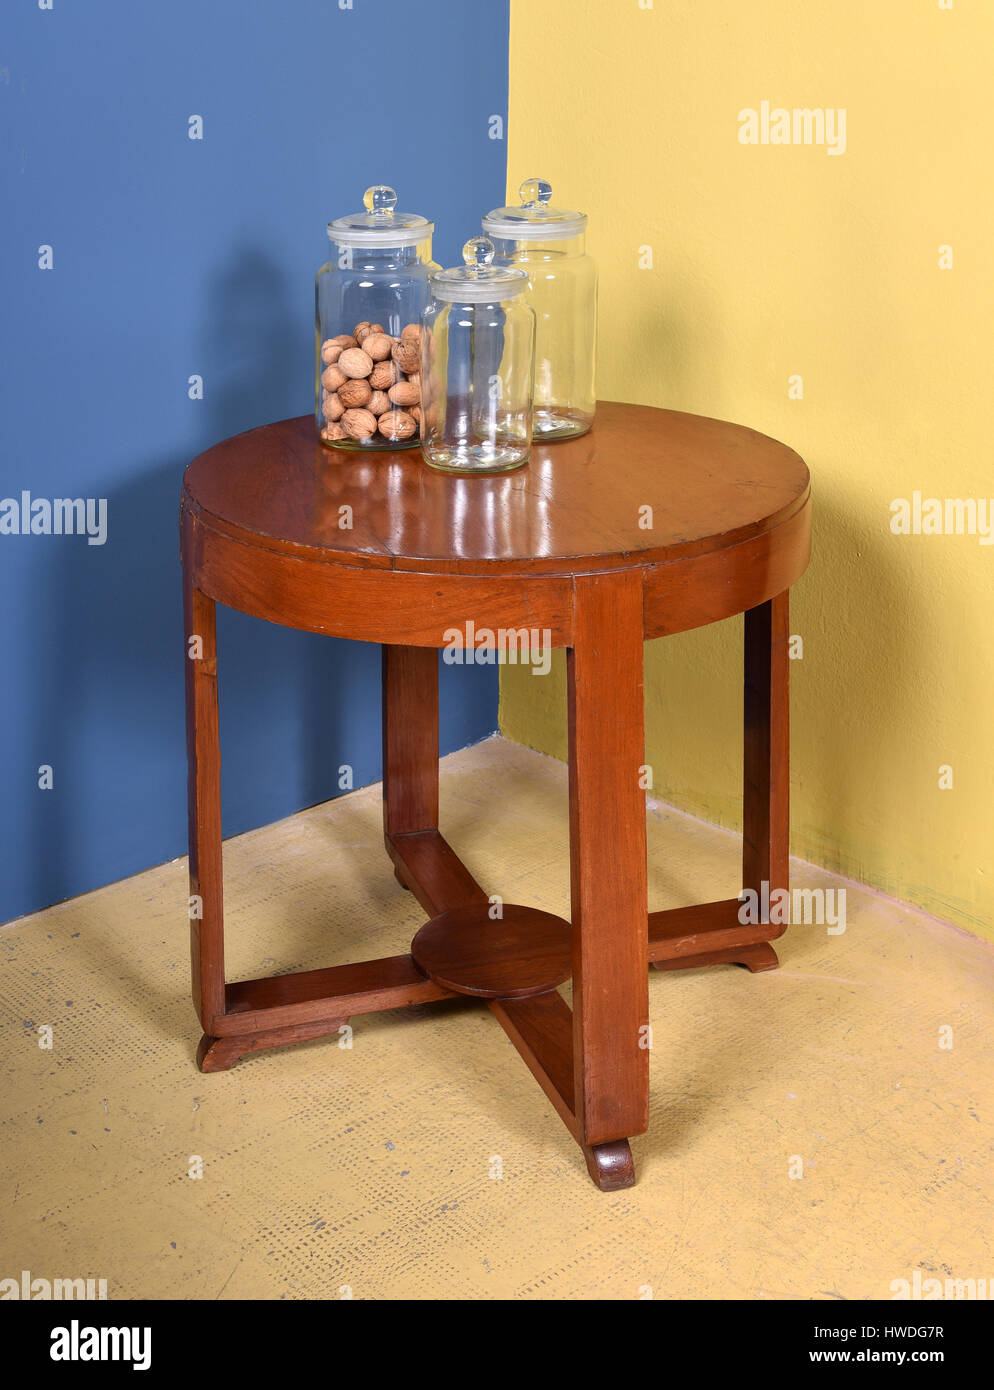 Retro Furniture Still Life of Small Round Wood Side Table with Collection of Three Glass Jars - One with Nuts - in Room with Blue and Yellow Walls Stock Photo